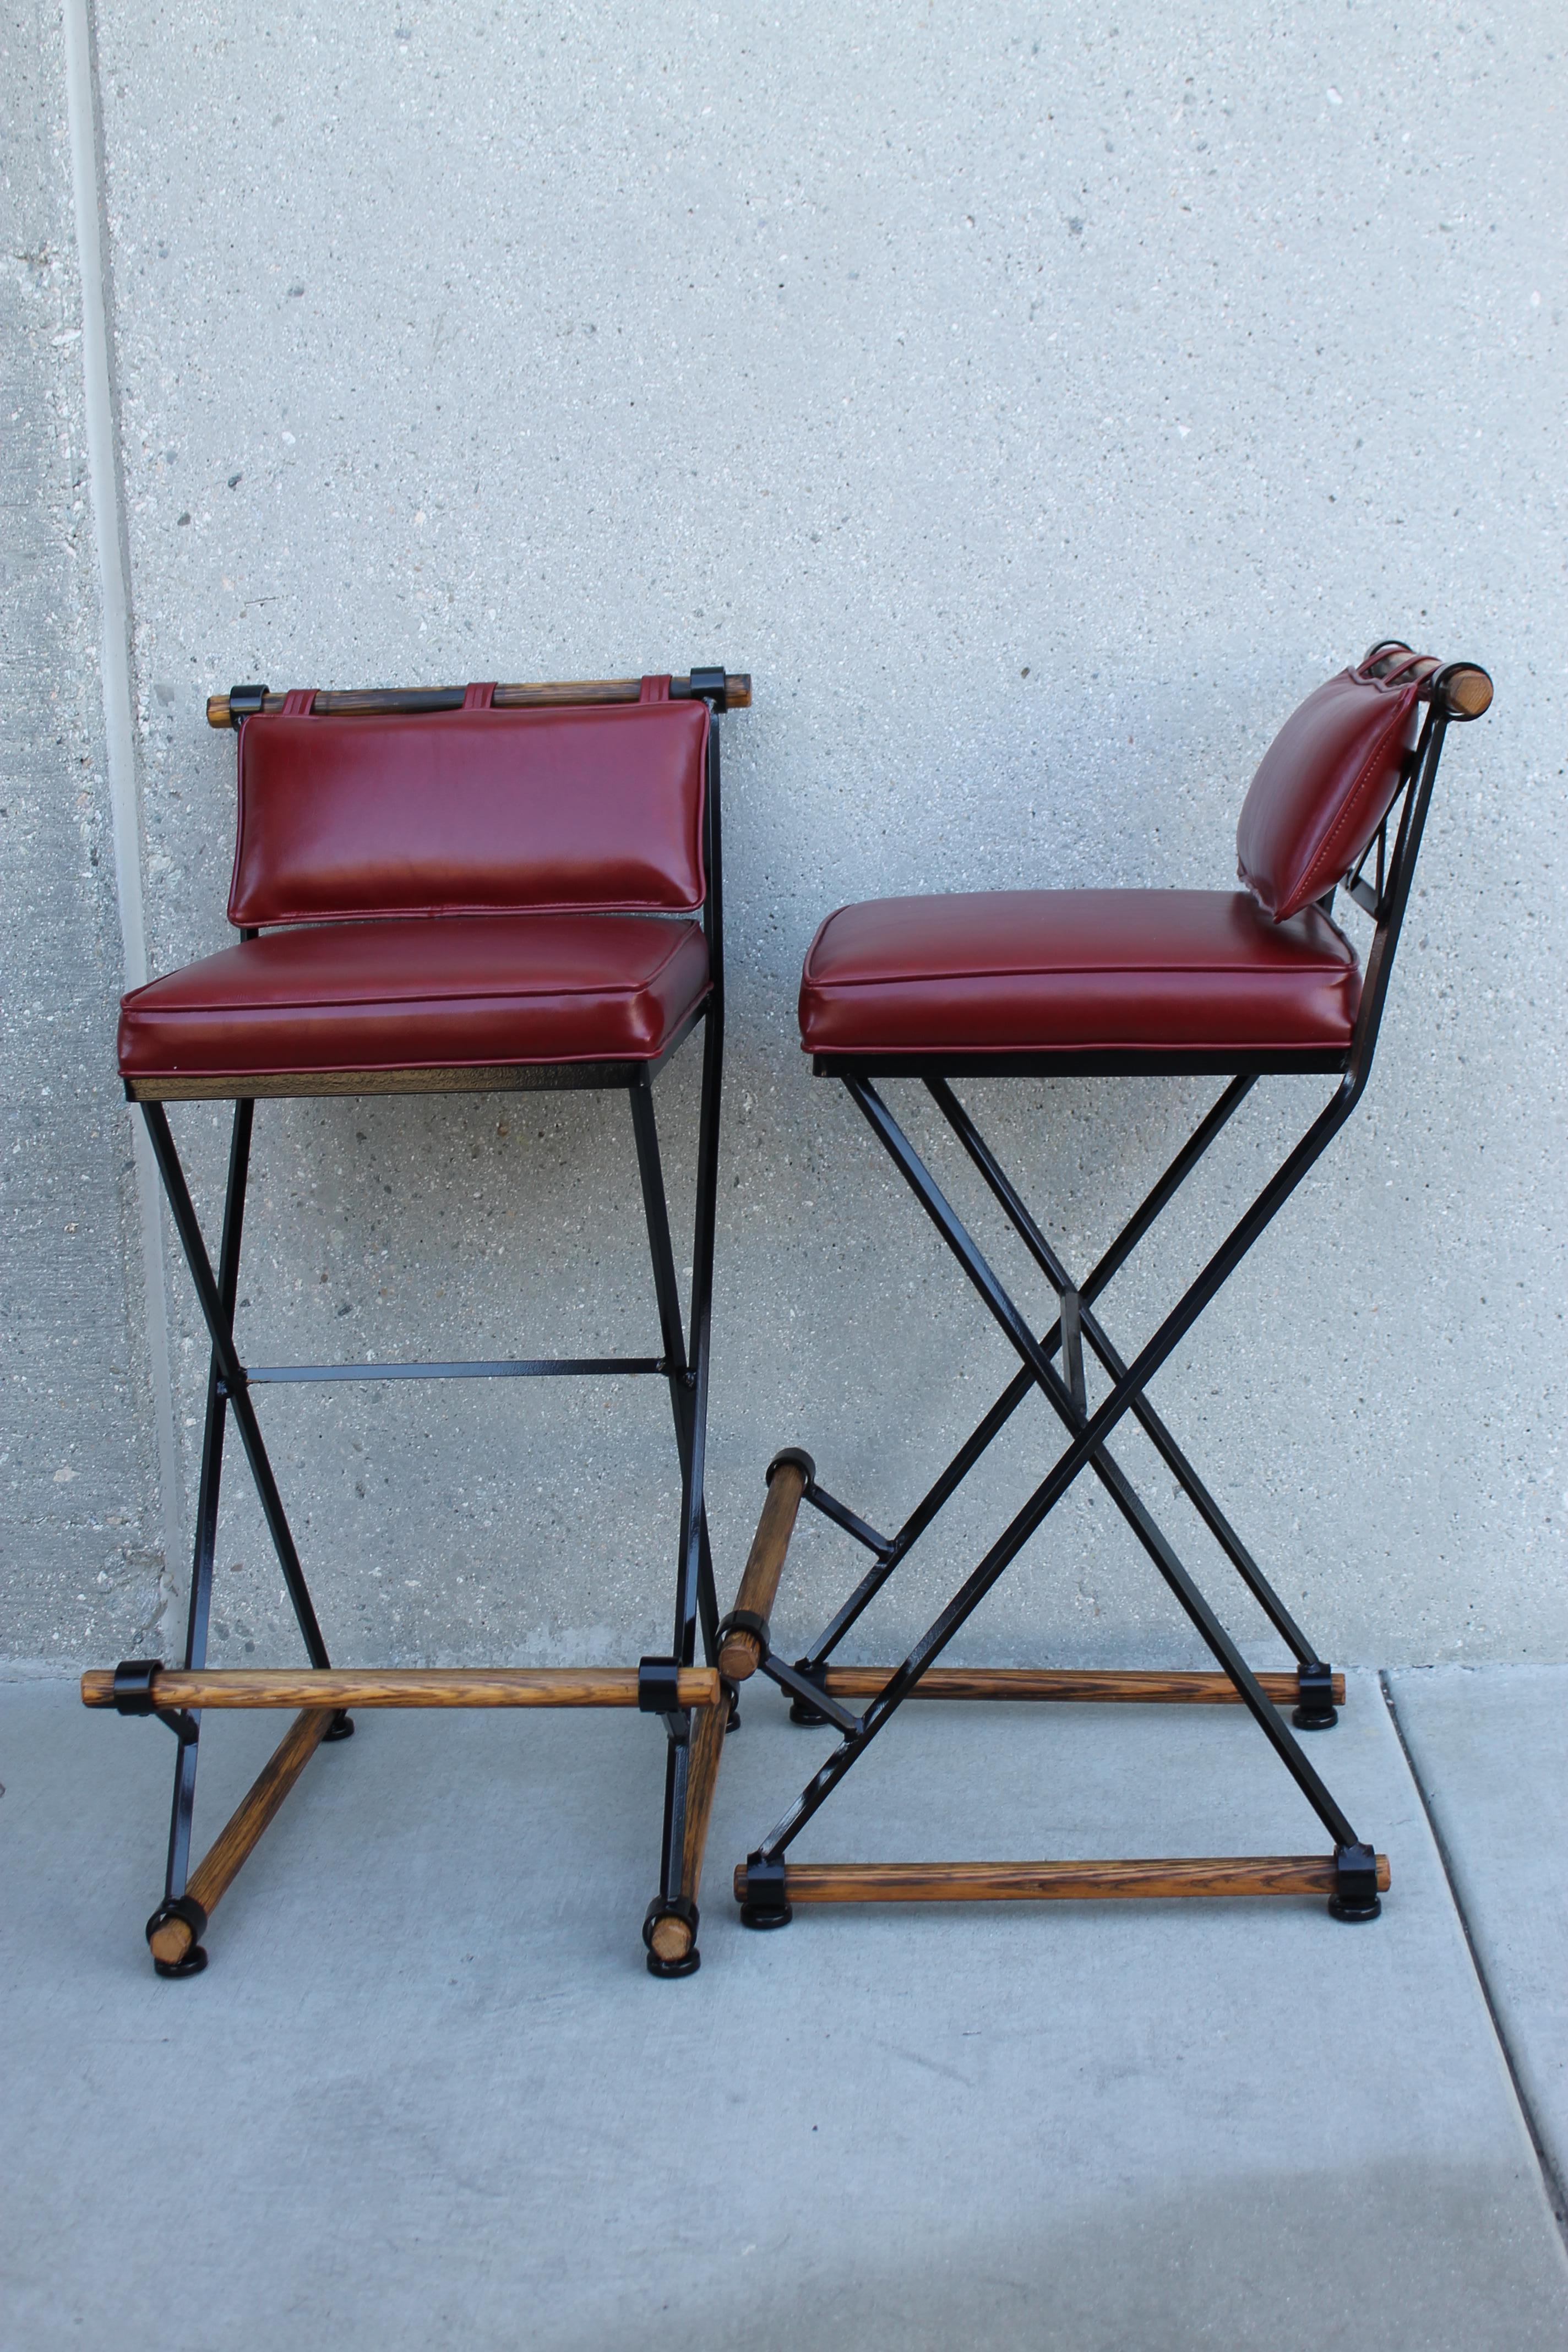 Pair of barstools in the style of Cleo Baldon and manufactured by Terra Furniture. We sand blasted and powder coated them to their original black color. We had new recycled burgundy leather cushions made with bridle ties. Stools are steel, oak and